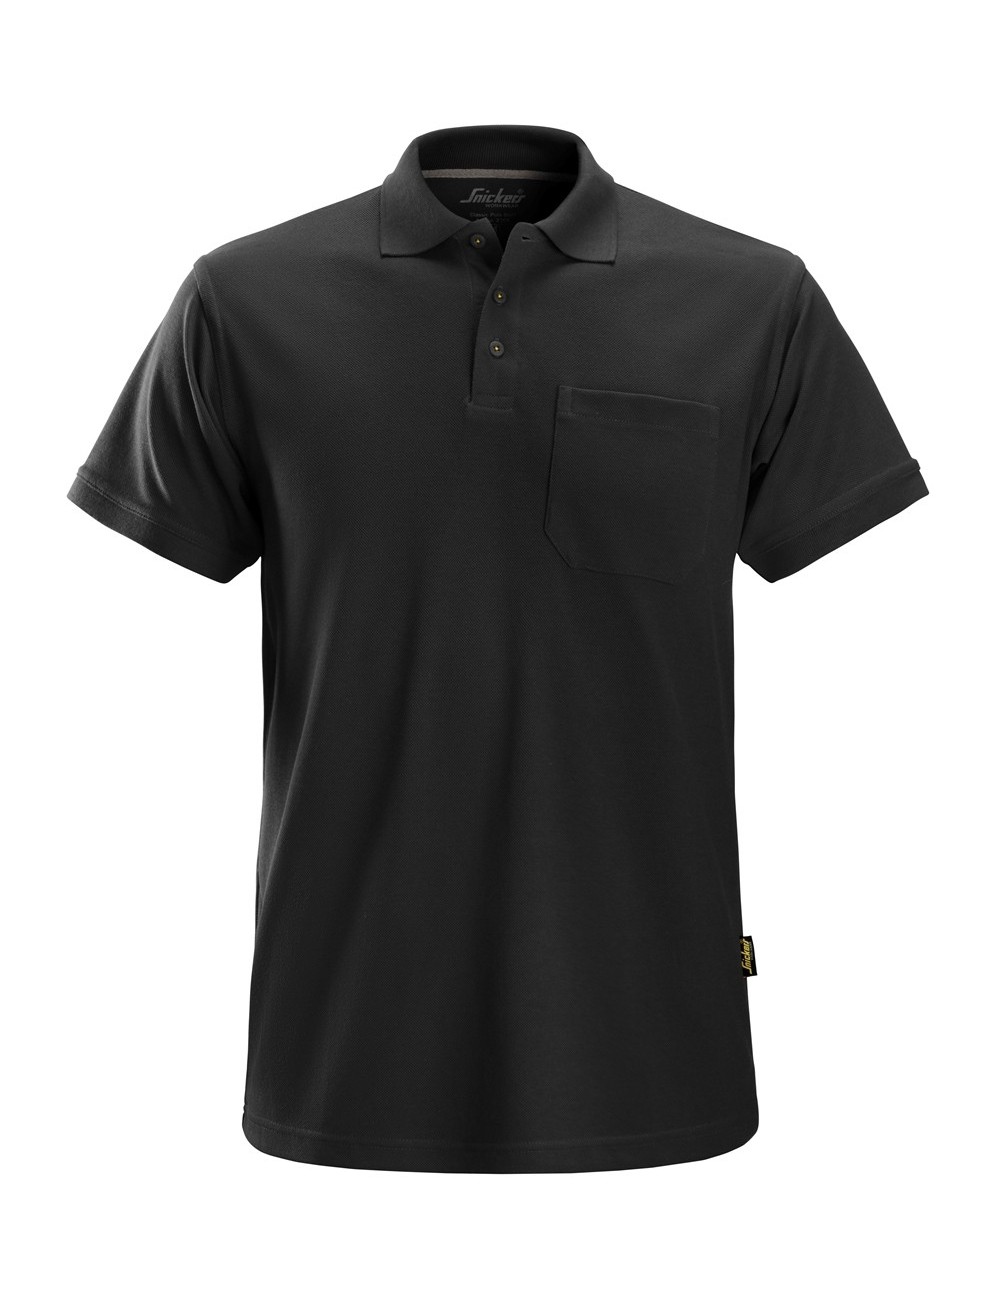 Snickers 2708 polo shirt